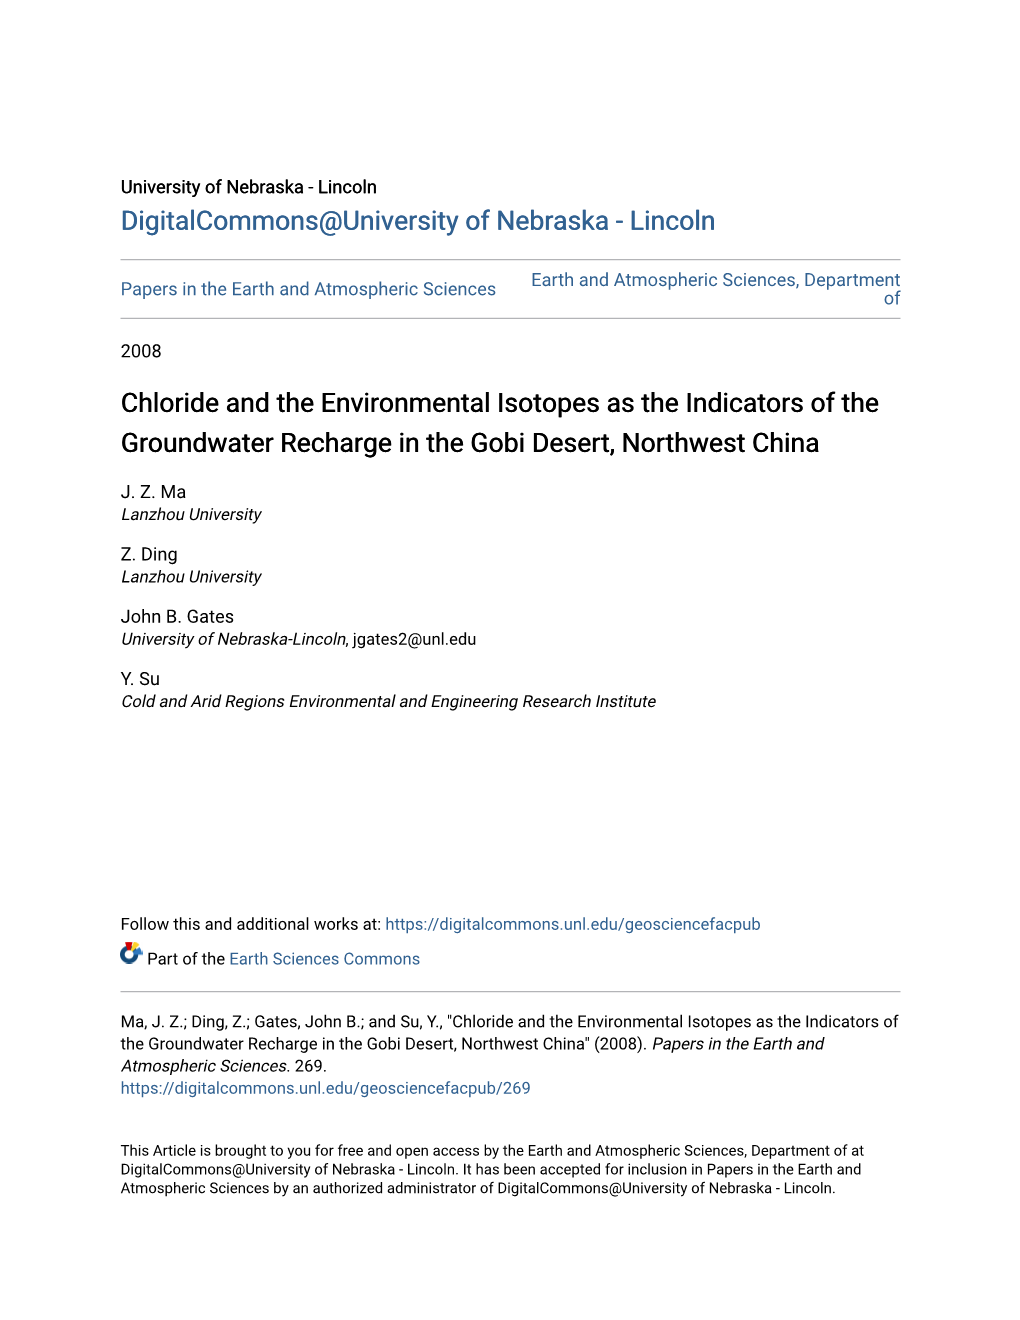 Chloride and the Environmental Isotopes As the Indicators of the Groundwater Recharge in the Gobi Desert, Northwest China